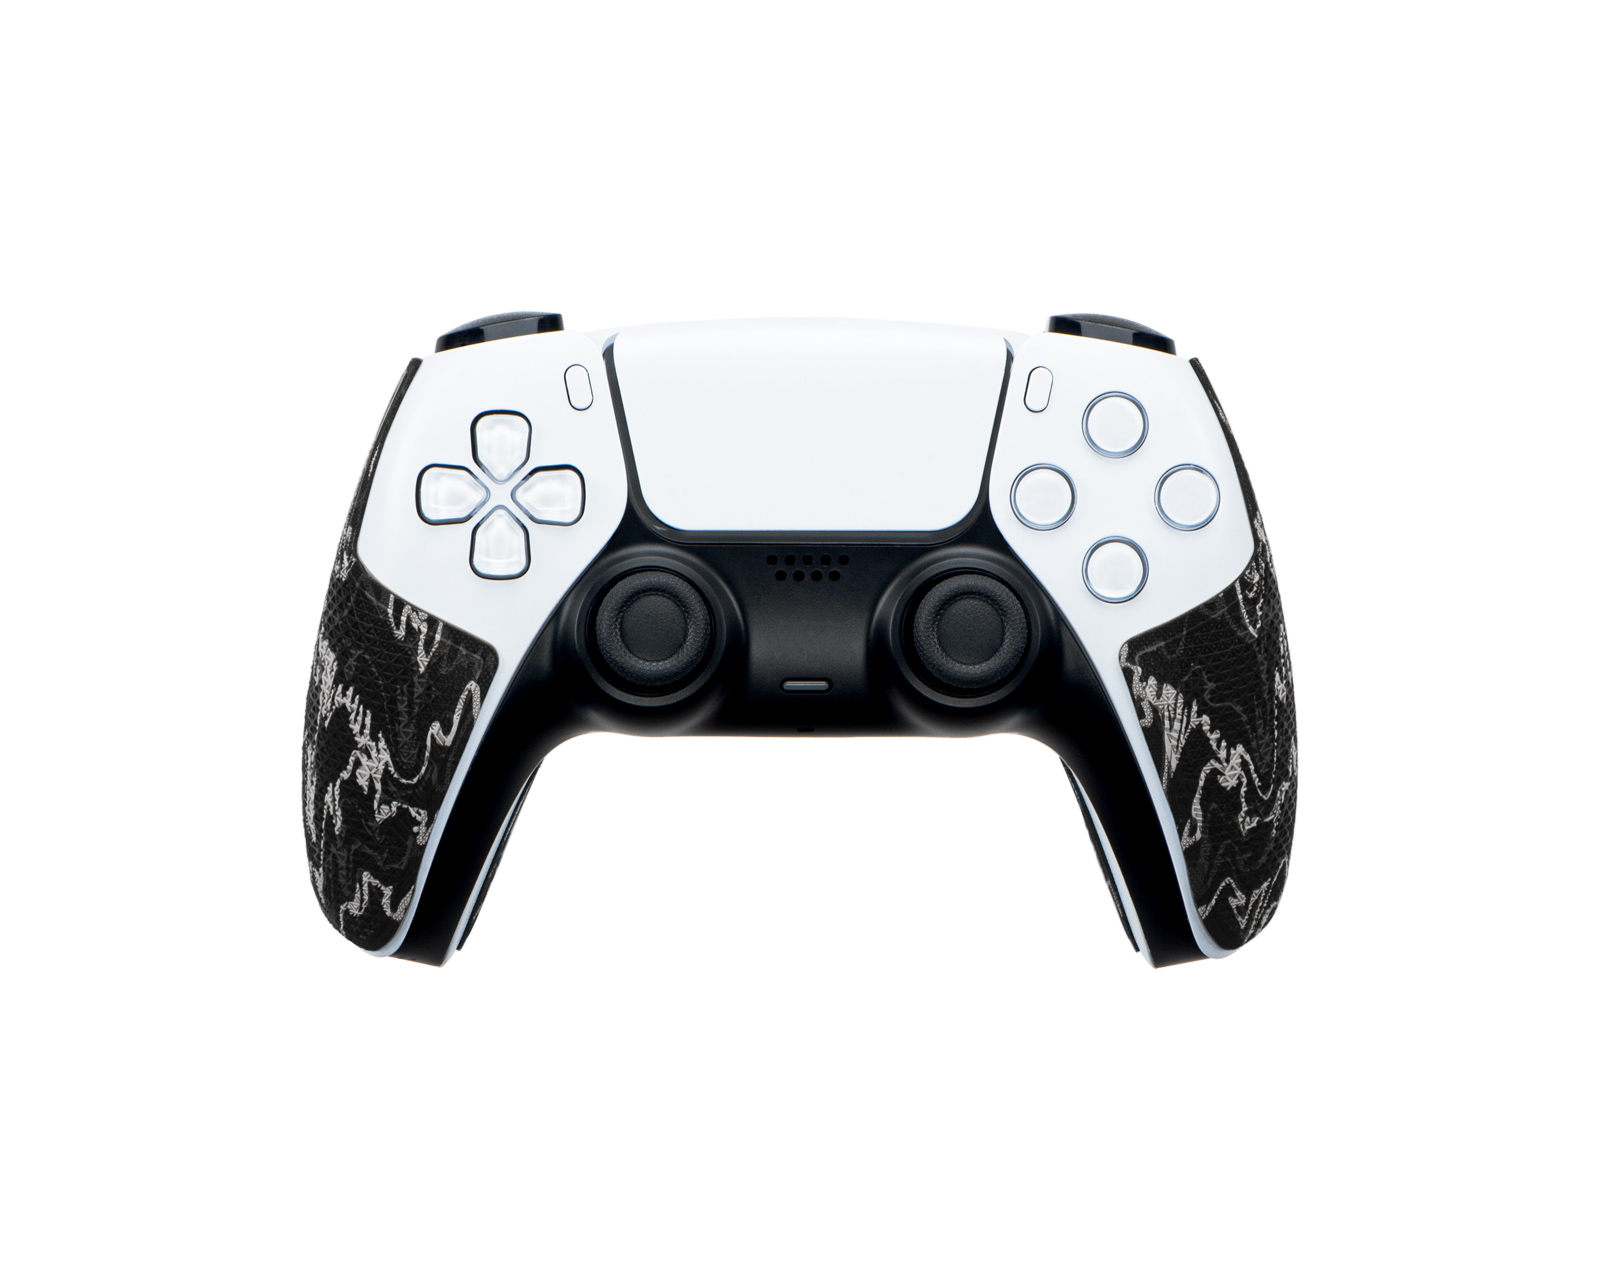 The SMARTGRIP - Revolutionary cover for PS4 controllers, 26,95 €